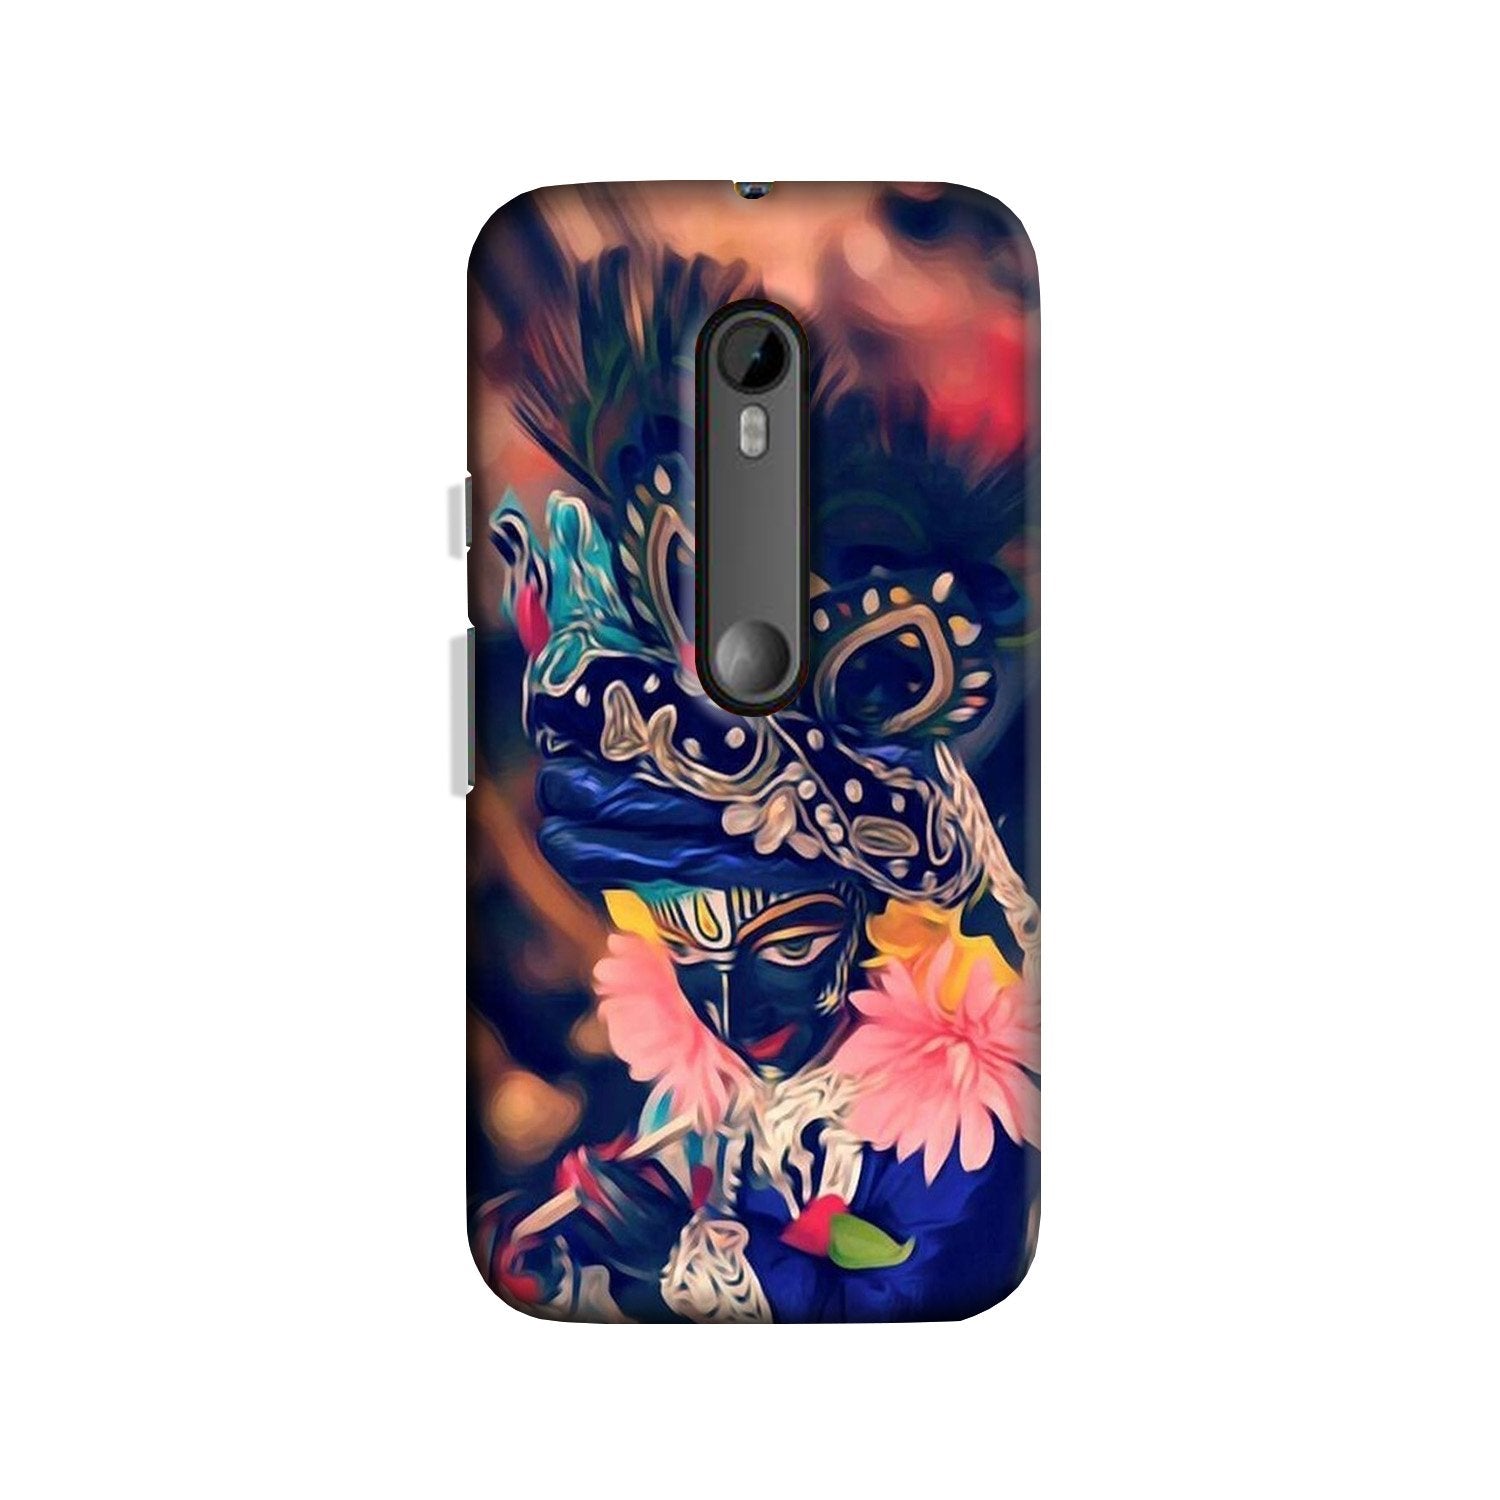 Lord Krishna Case for Moto X Force